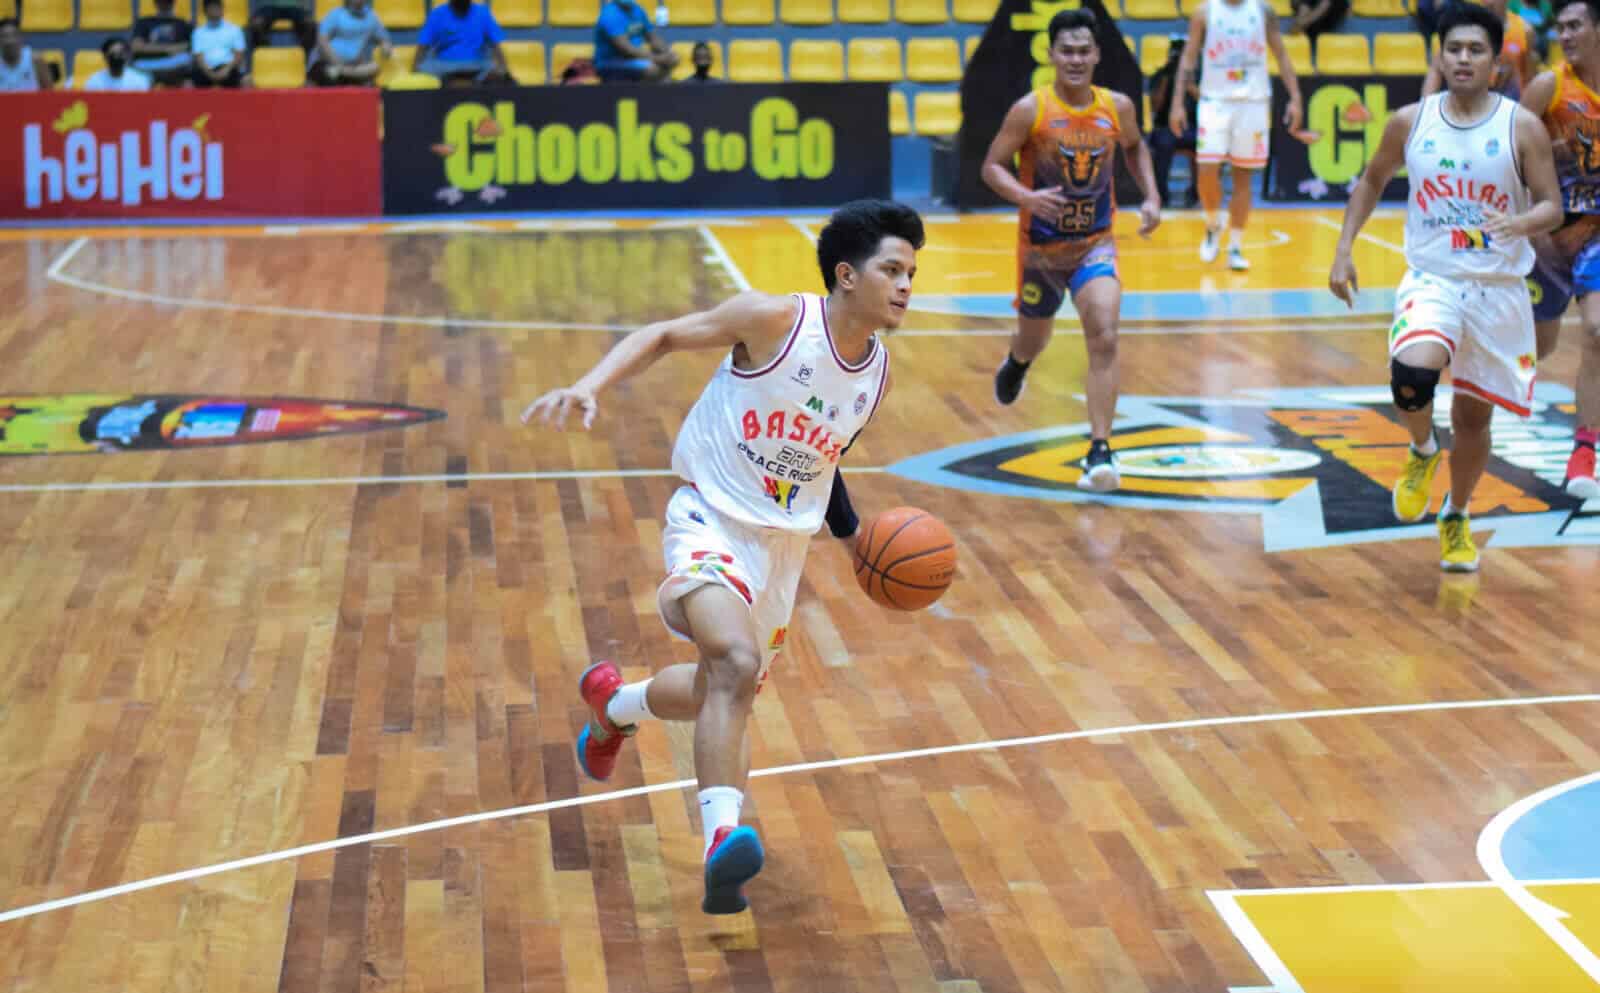 A basketball player dribbling the ball on a hardwood floor during an upset win over Kapatagan in VisMin Cup.